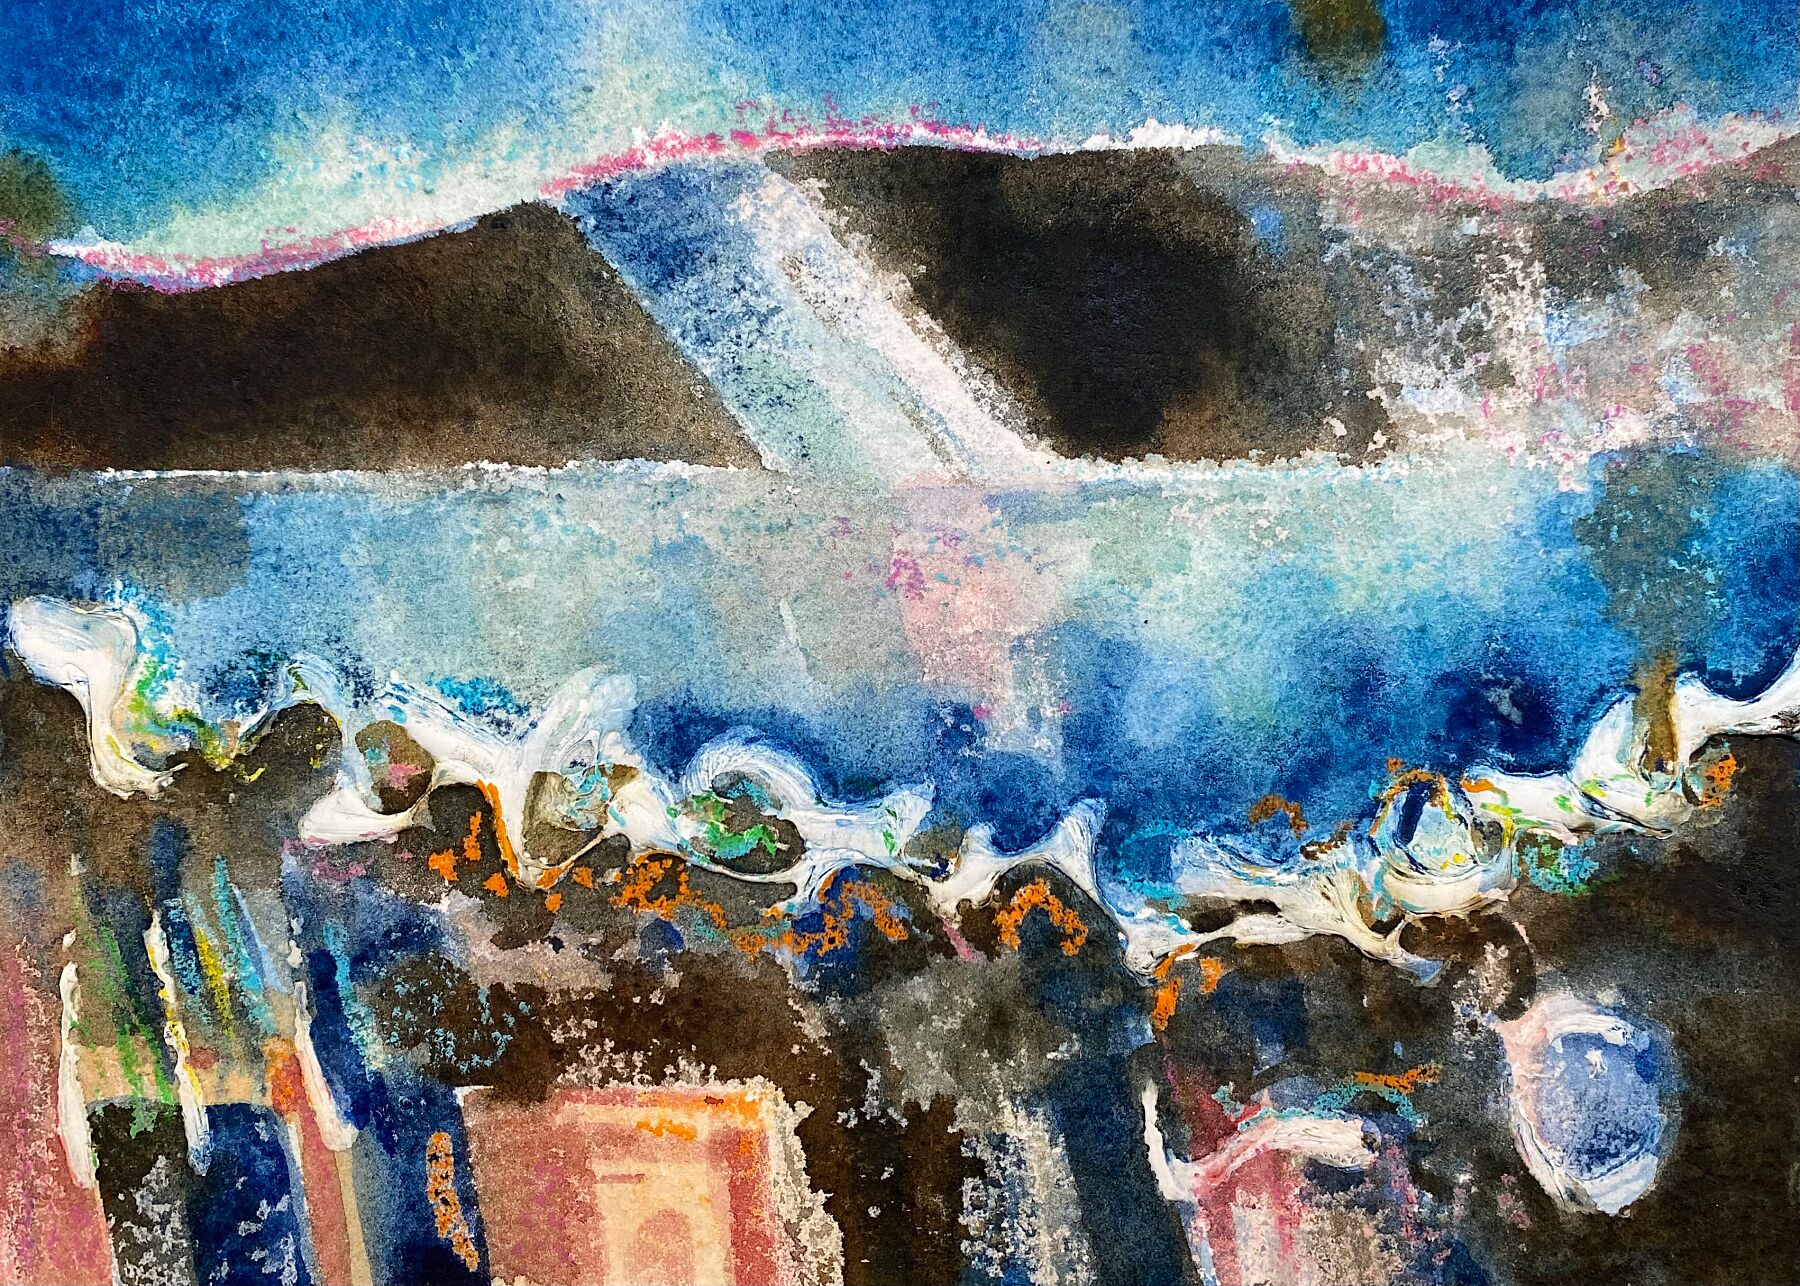 An abstract landscape picture by artist Jane Glue from Orkney, Scotland using mixed media such as watercolours, gesso, collage and crayons.